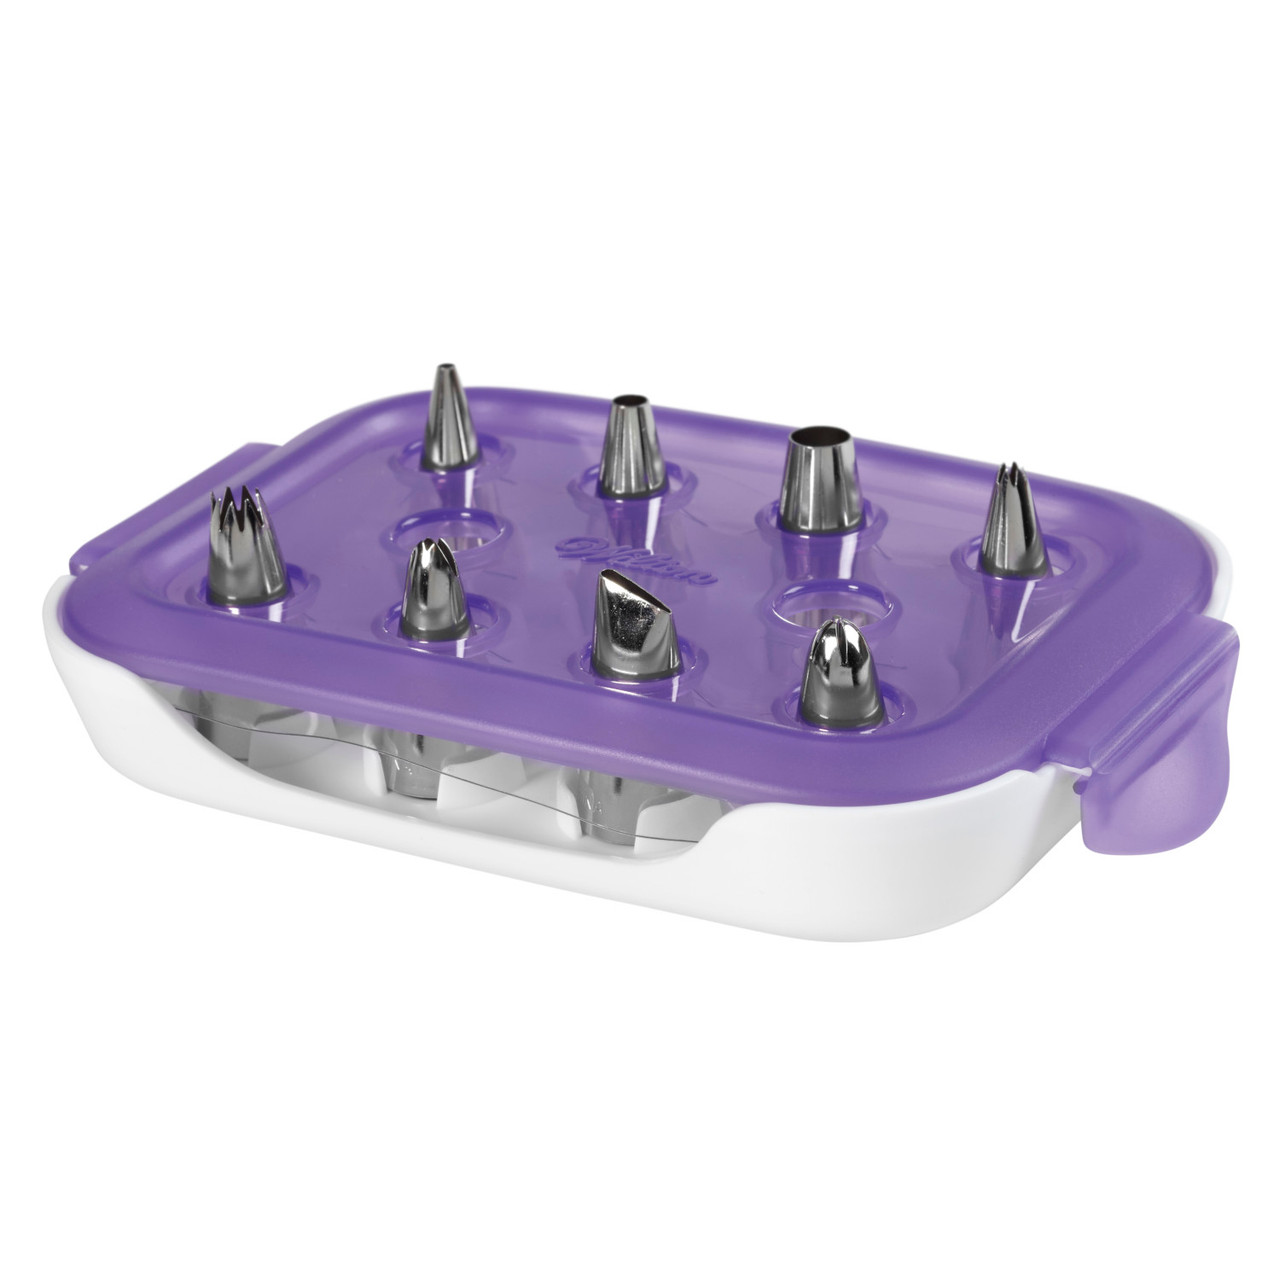 Starter Decorating and Piping Tip Set, 9-Piece - Wilton